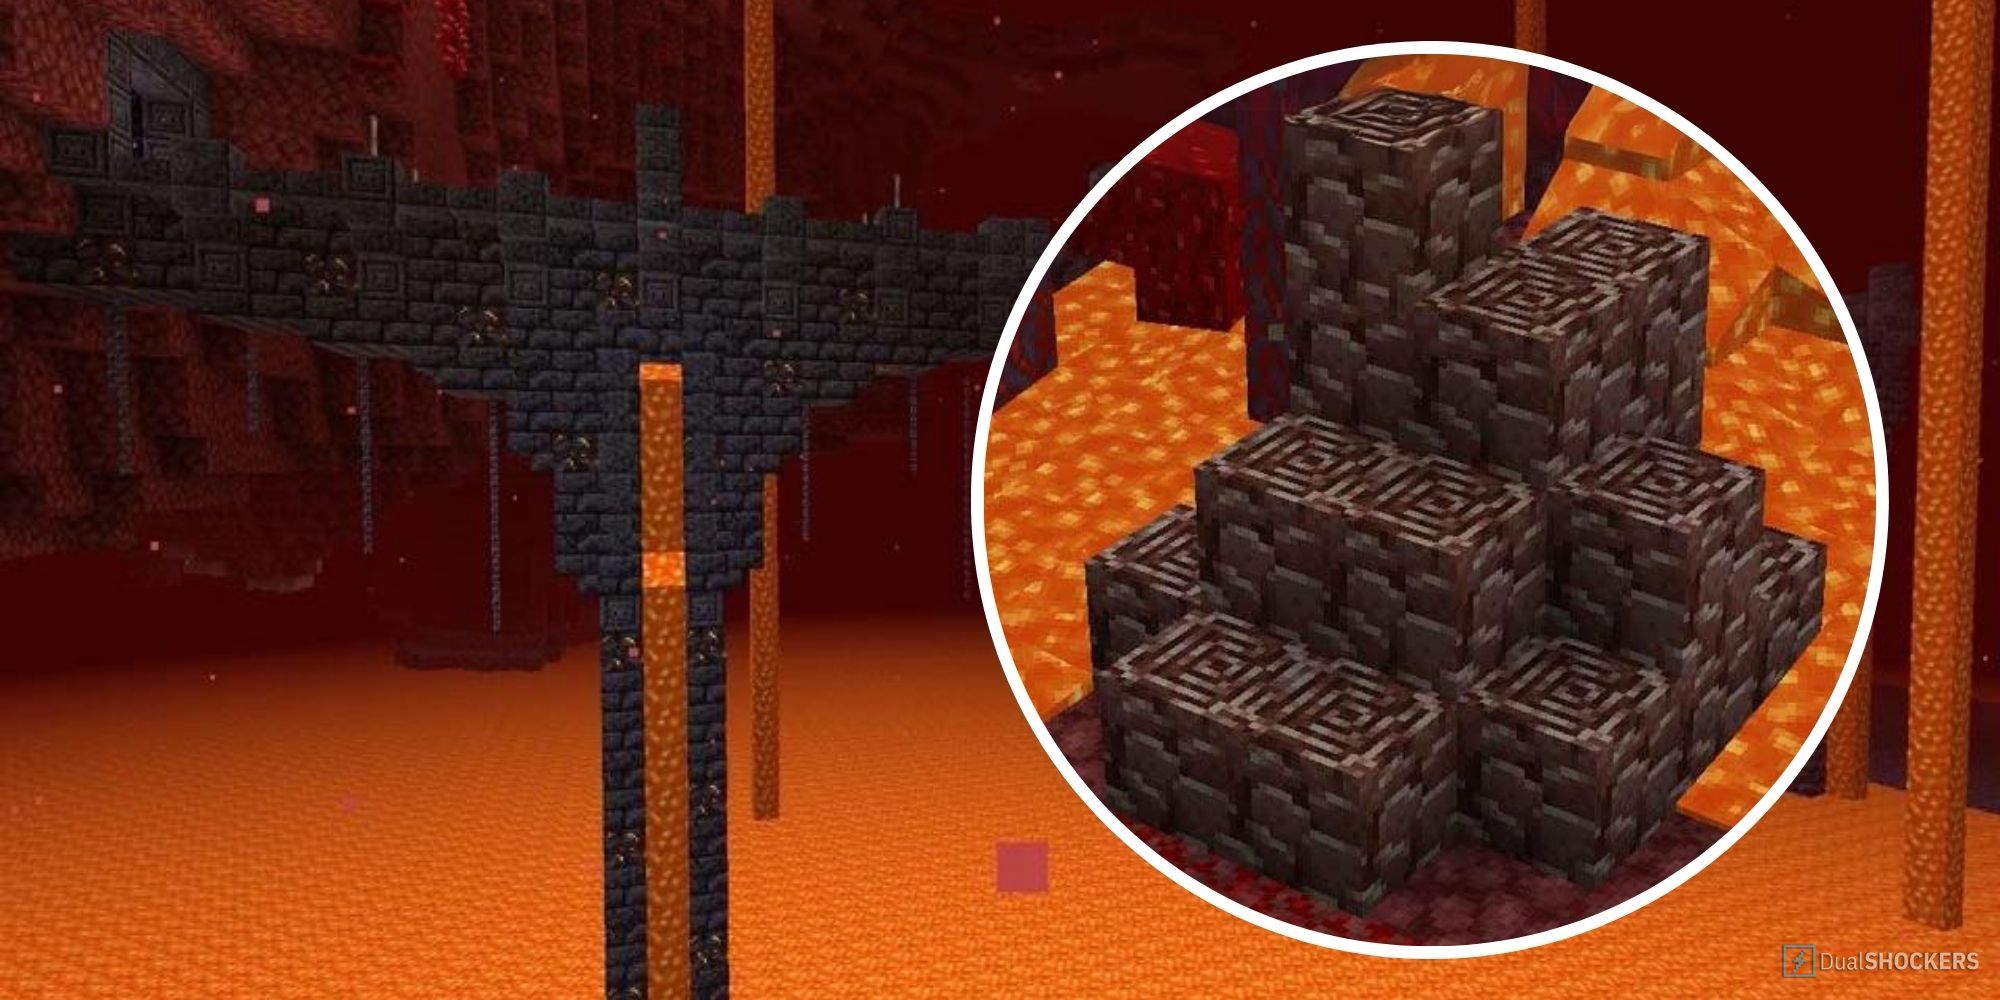 An image of a bridge in the nether, with Ancient Debris shown in a large size alongside it.